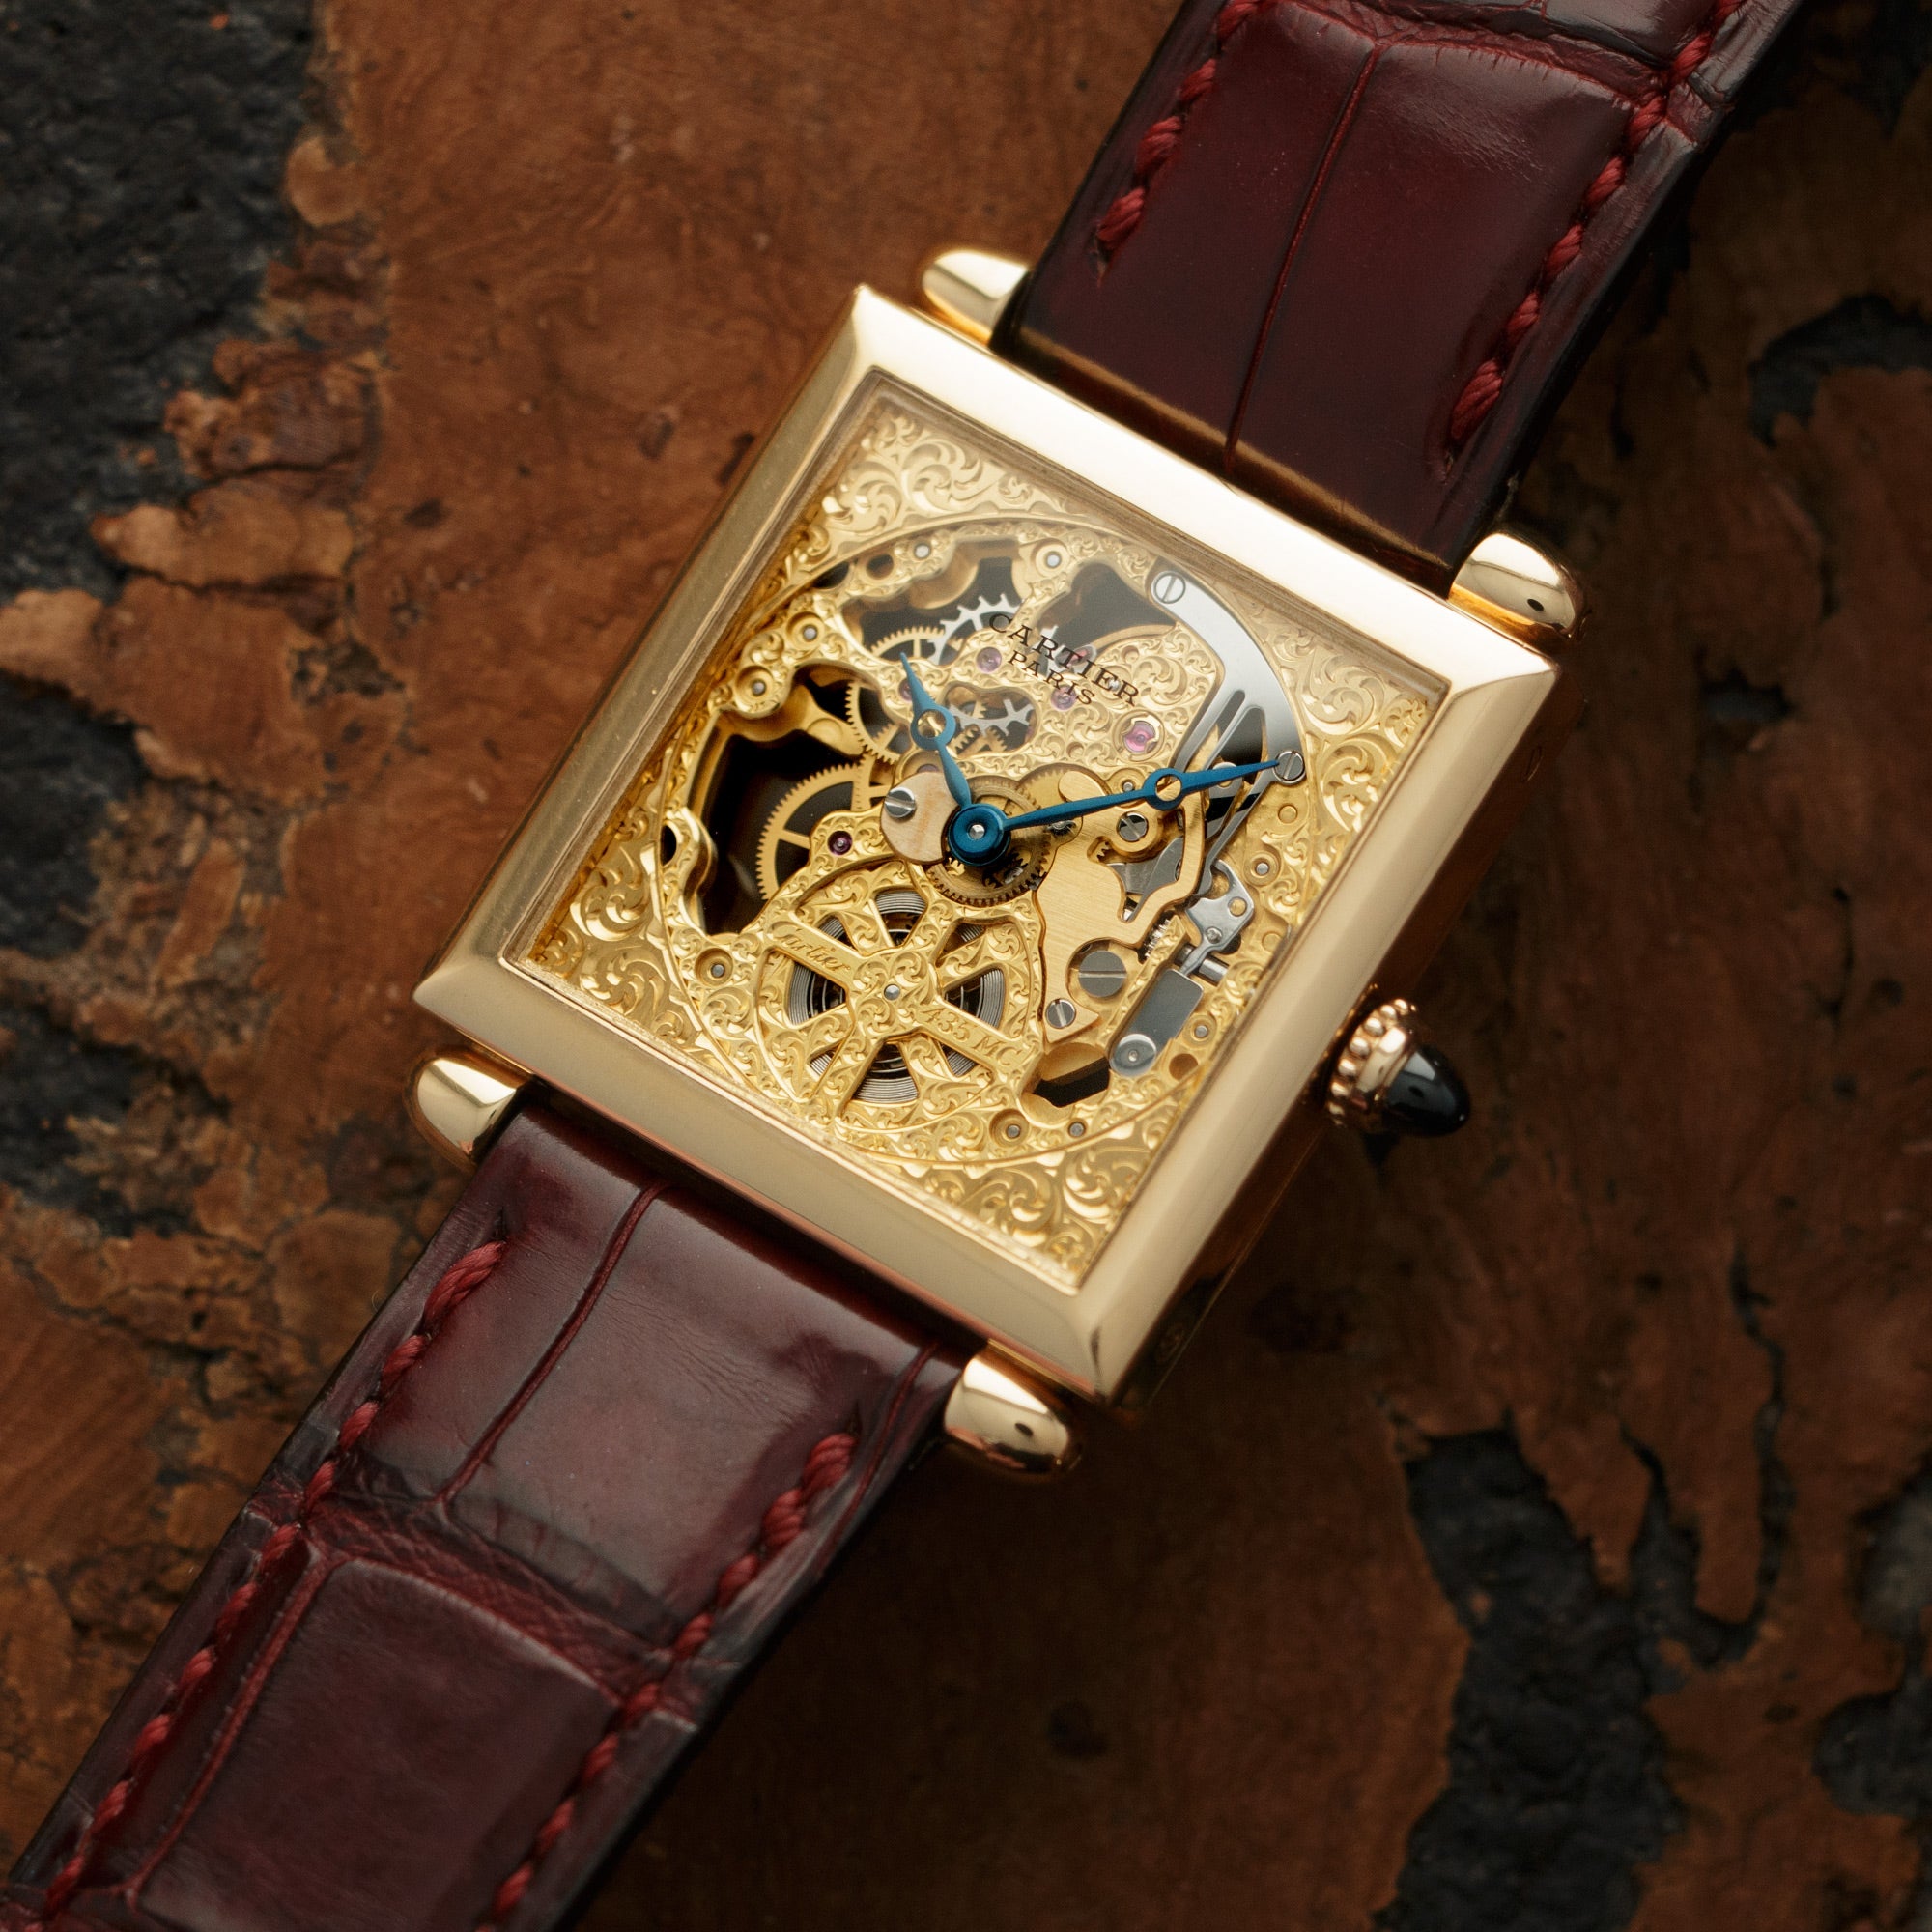 Cartier - Cartier Yellow Gold Carree Obus Skeleton Watch, Limited to 100 - The Keystone Watches